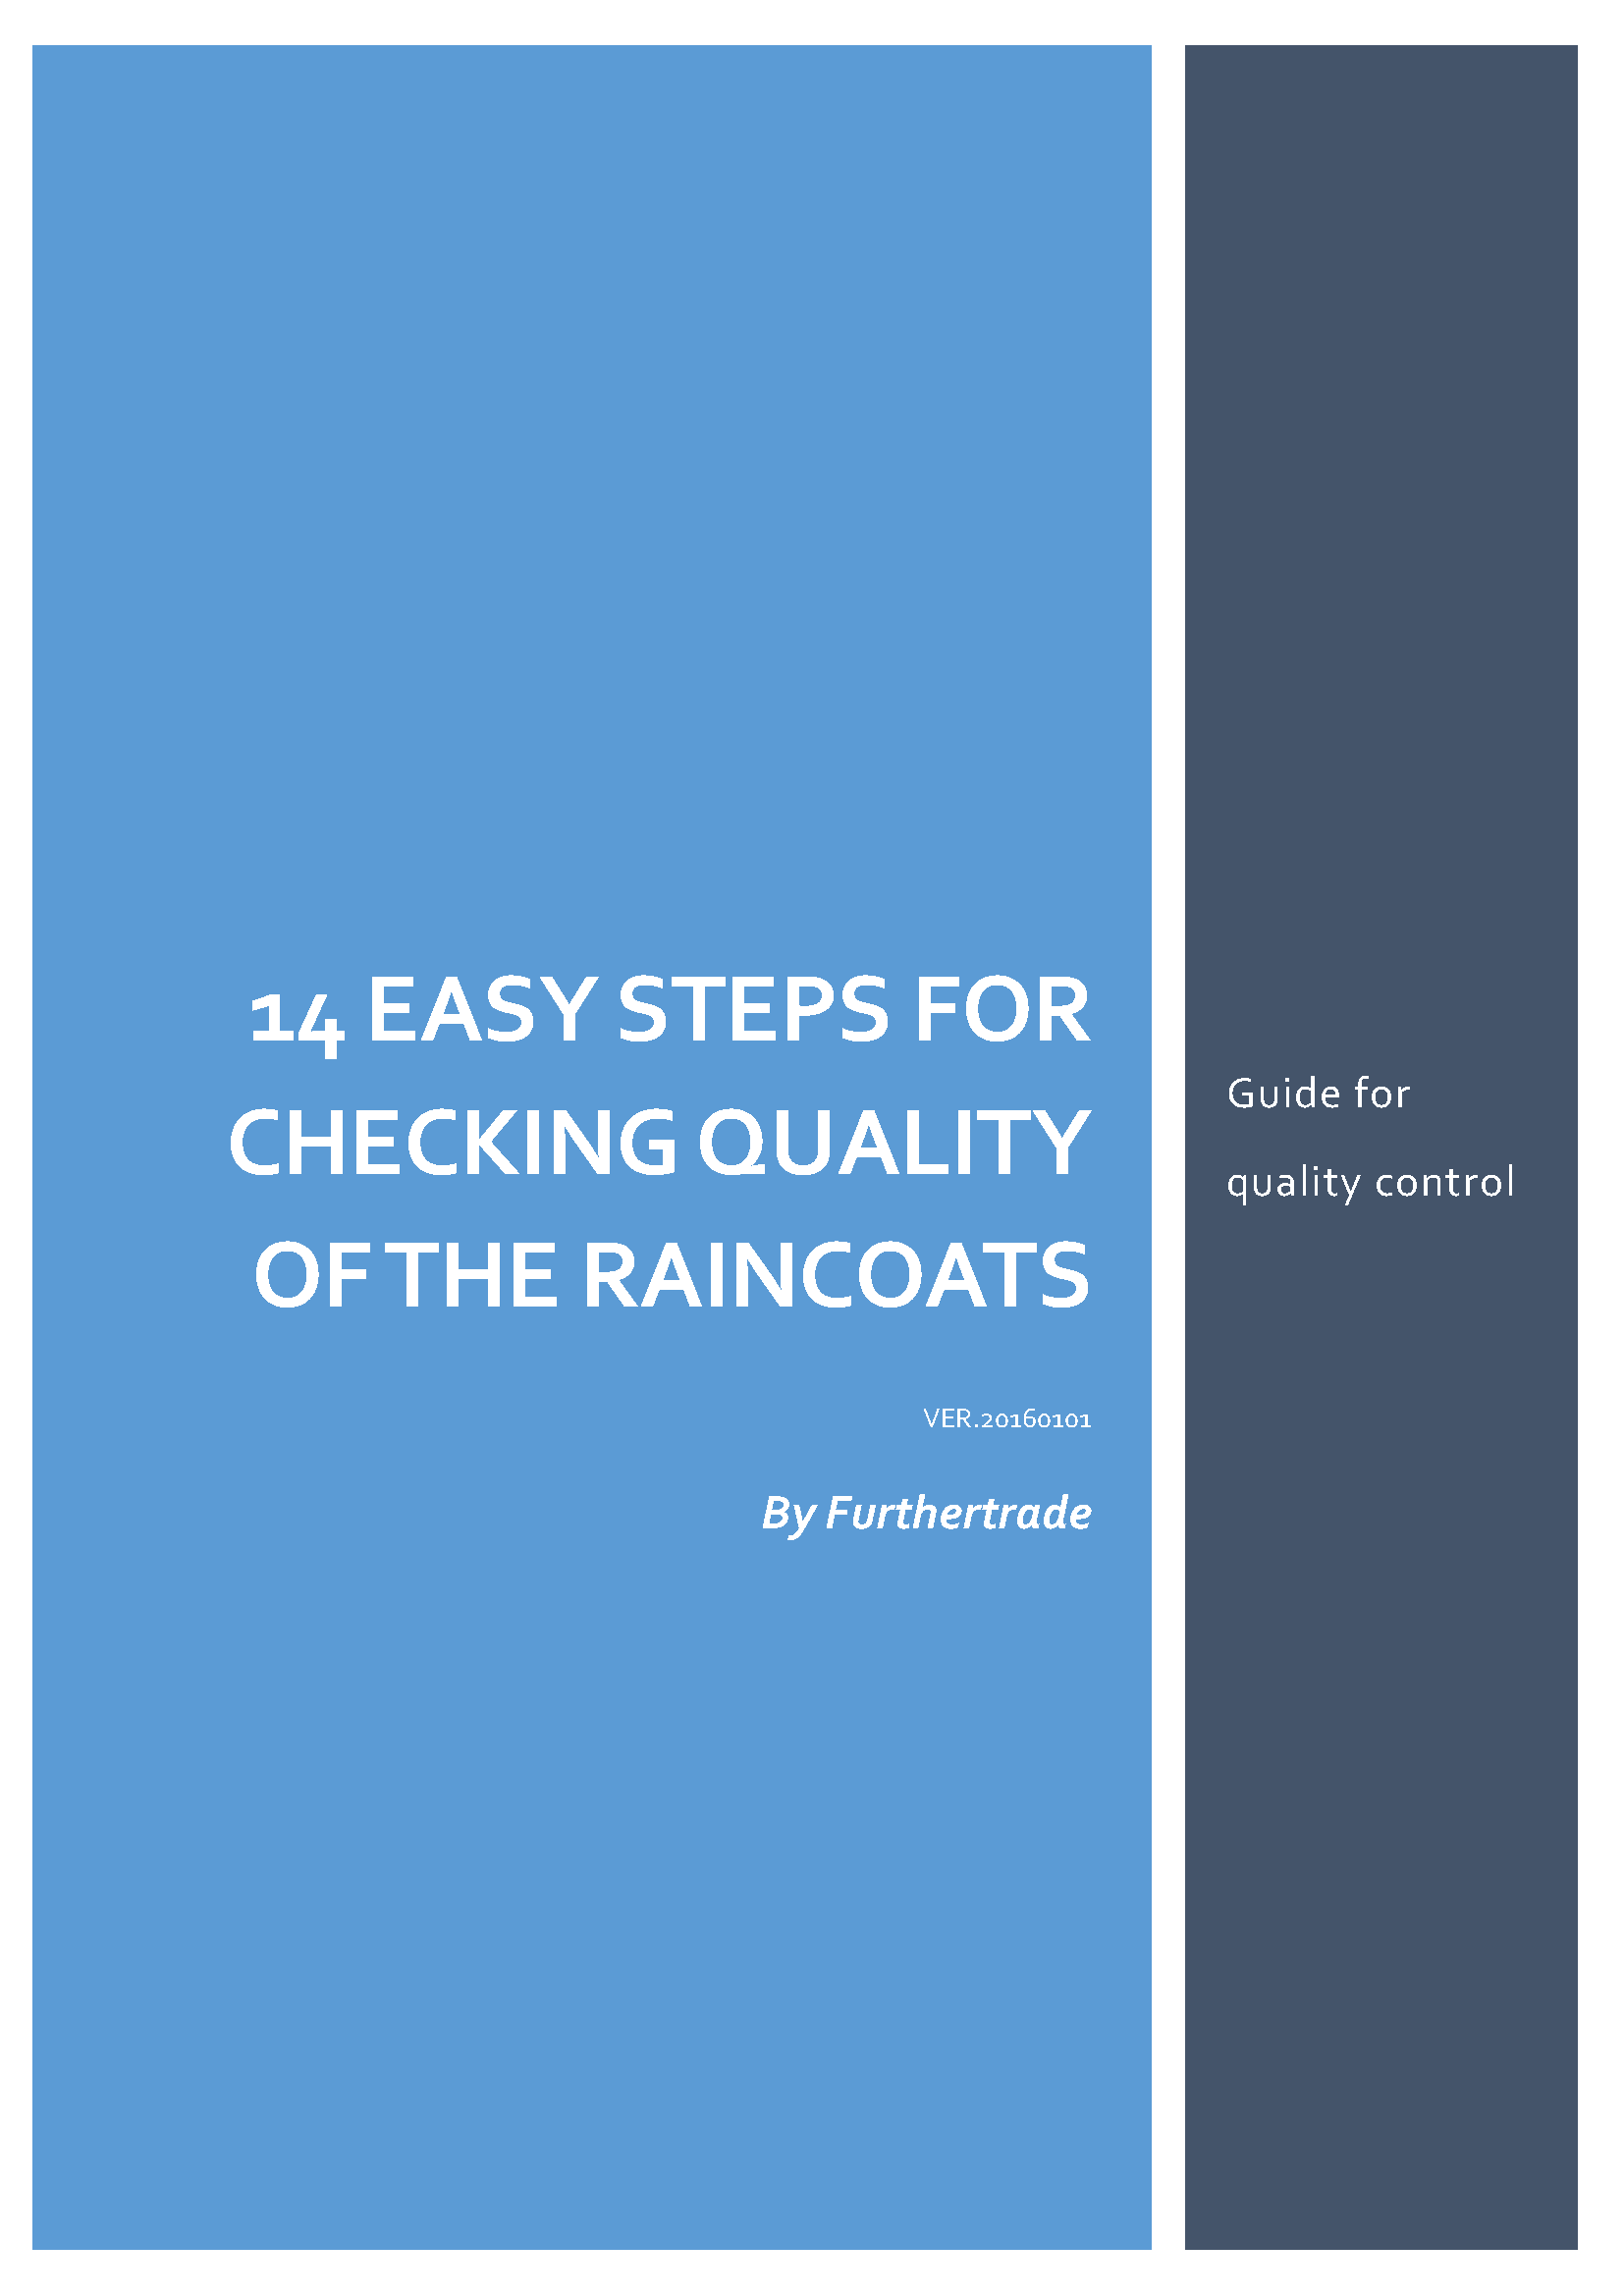 14 EASY STEPS FOR CHECKING QUALITY OF THE RAINCOATS